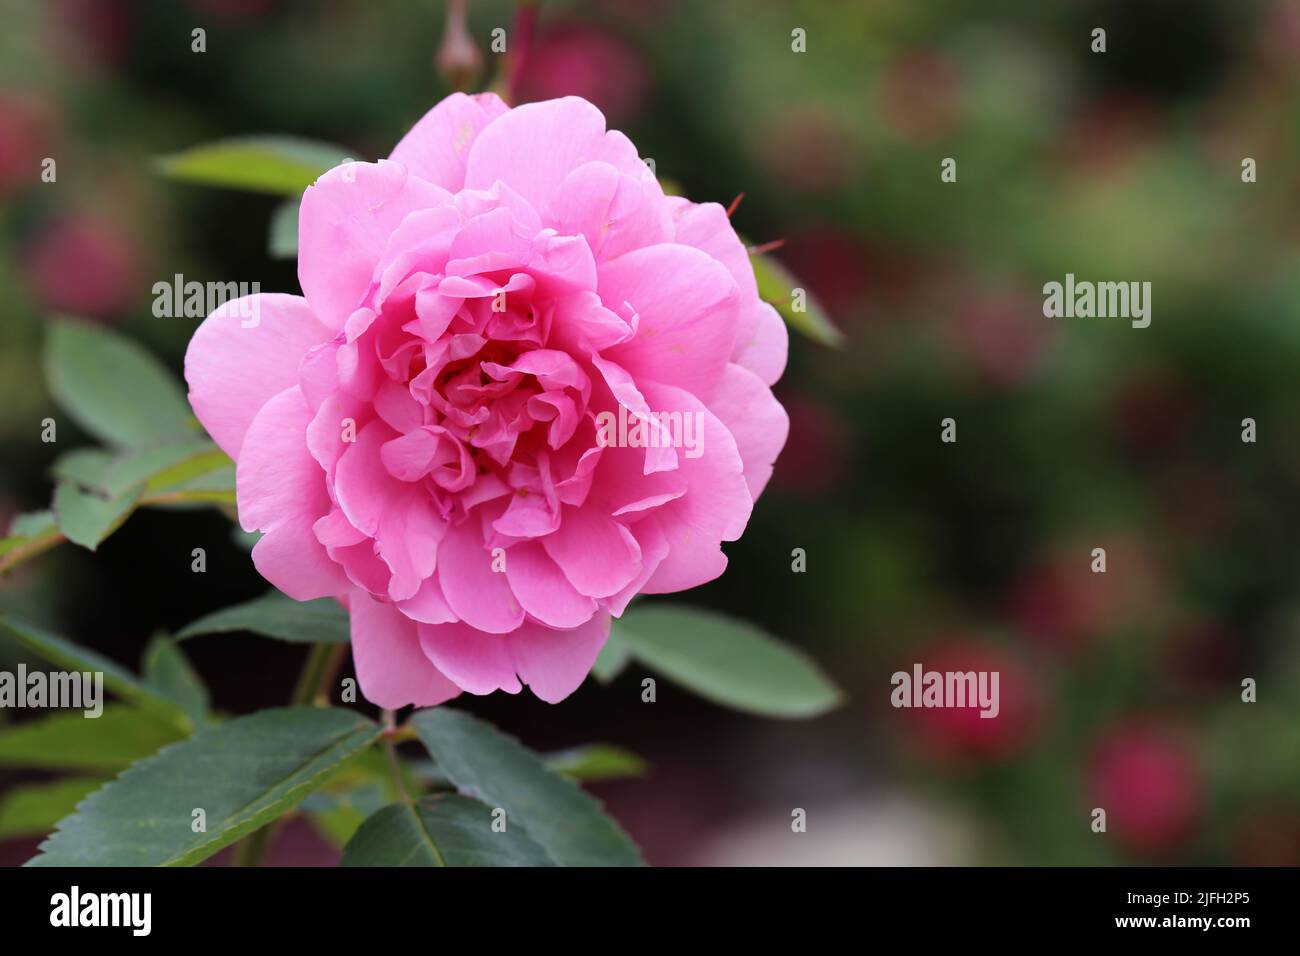 Beautiful blooming pink rose flower and some leaves in a closeup color image. Soft bokeh background. Photographed in a garden located in Kuopio. Stock Photo